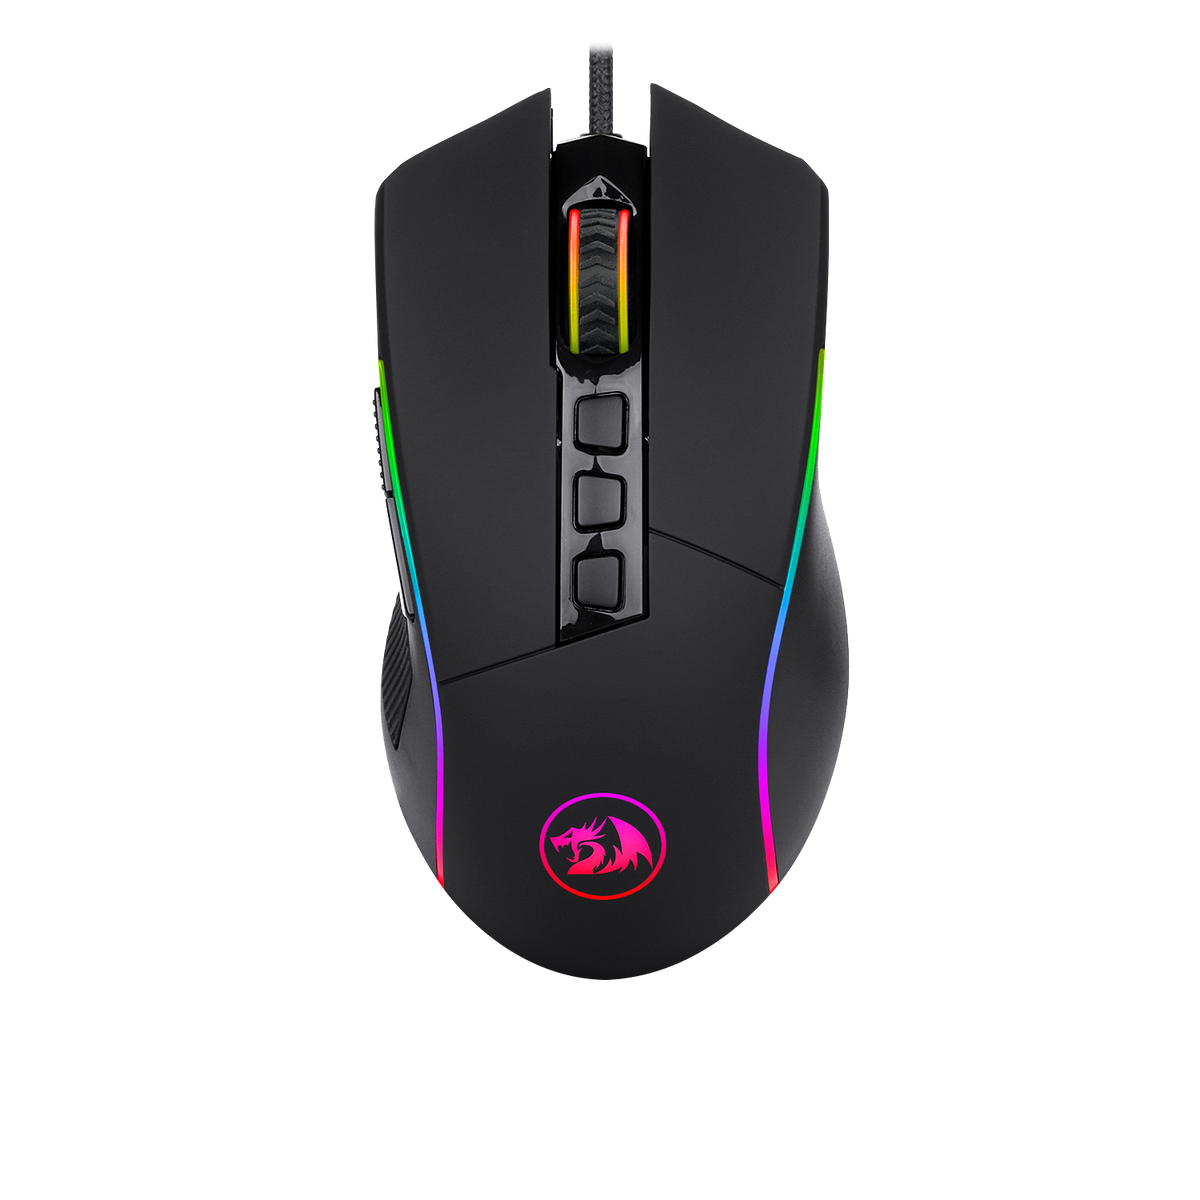 Redragon M721-Pro Lonewolf2 Gaming mouse, Wired Mouse RGB Lighting